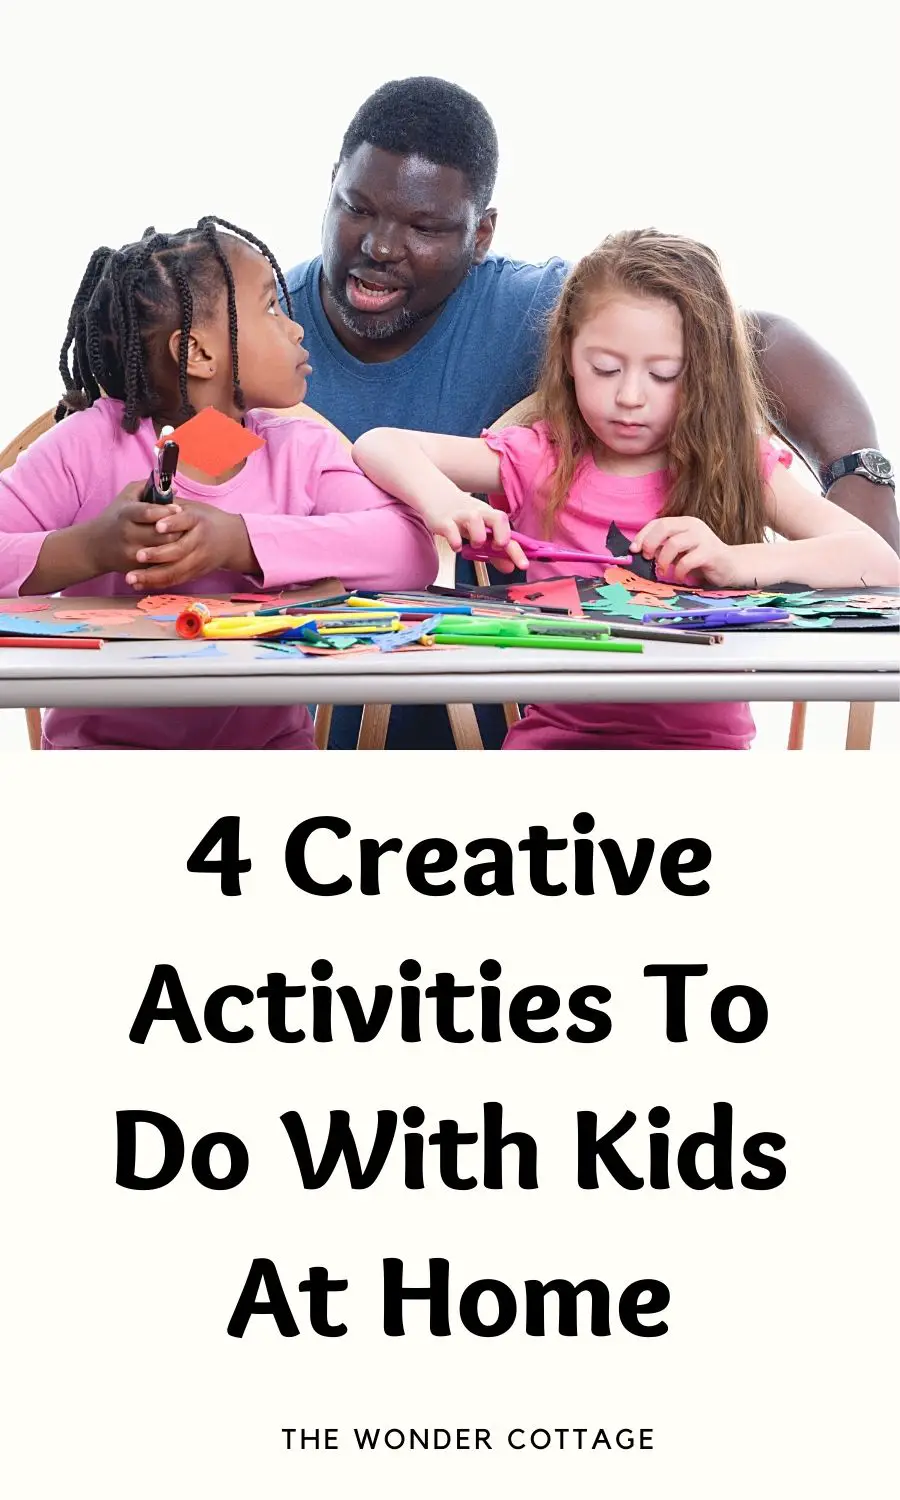 Keeping Your Kids Engaged with Creative Activities at Home